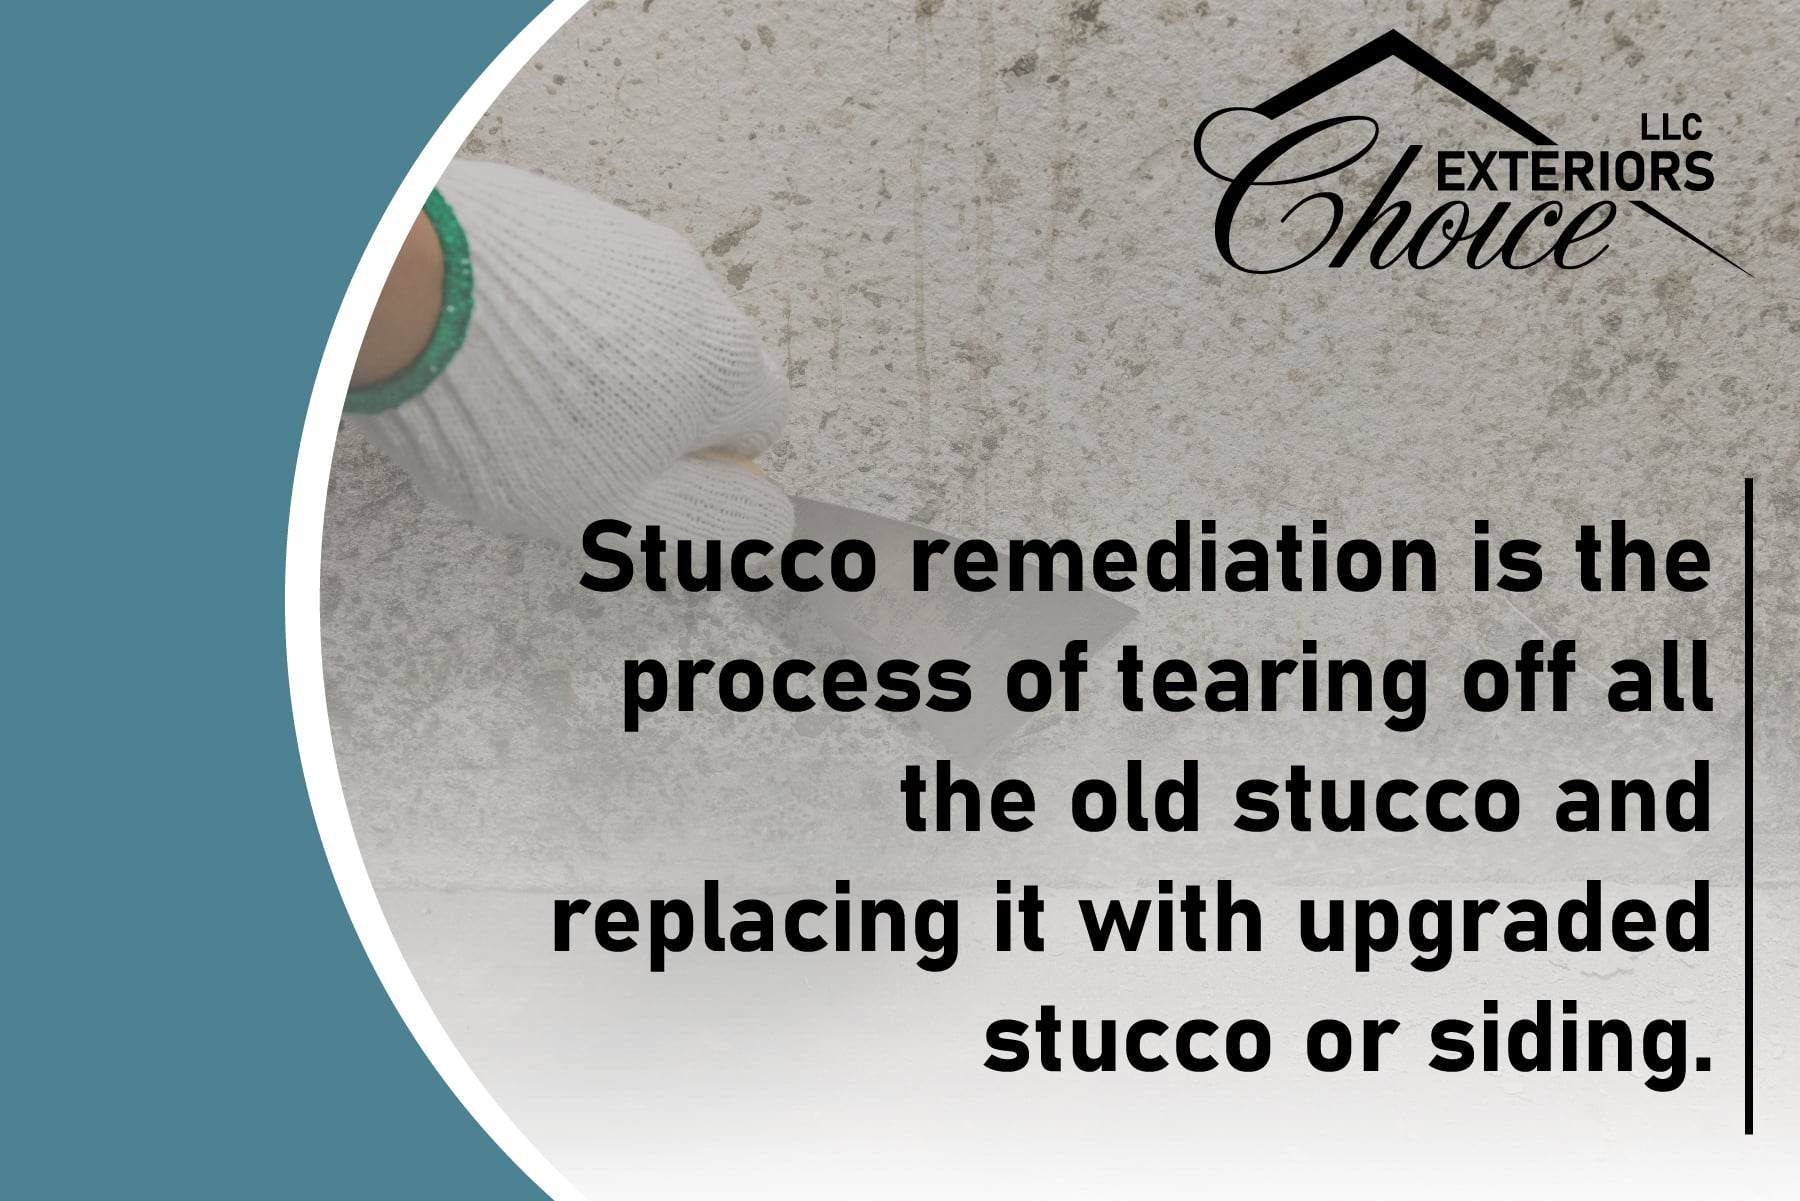 stucco-remediation-is-the-process-of-tearing-off